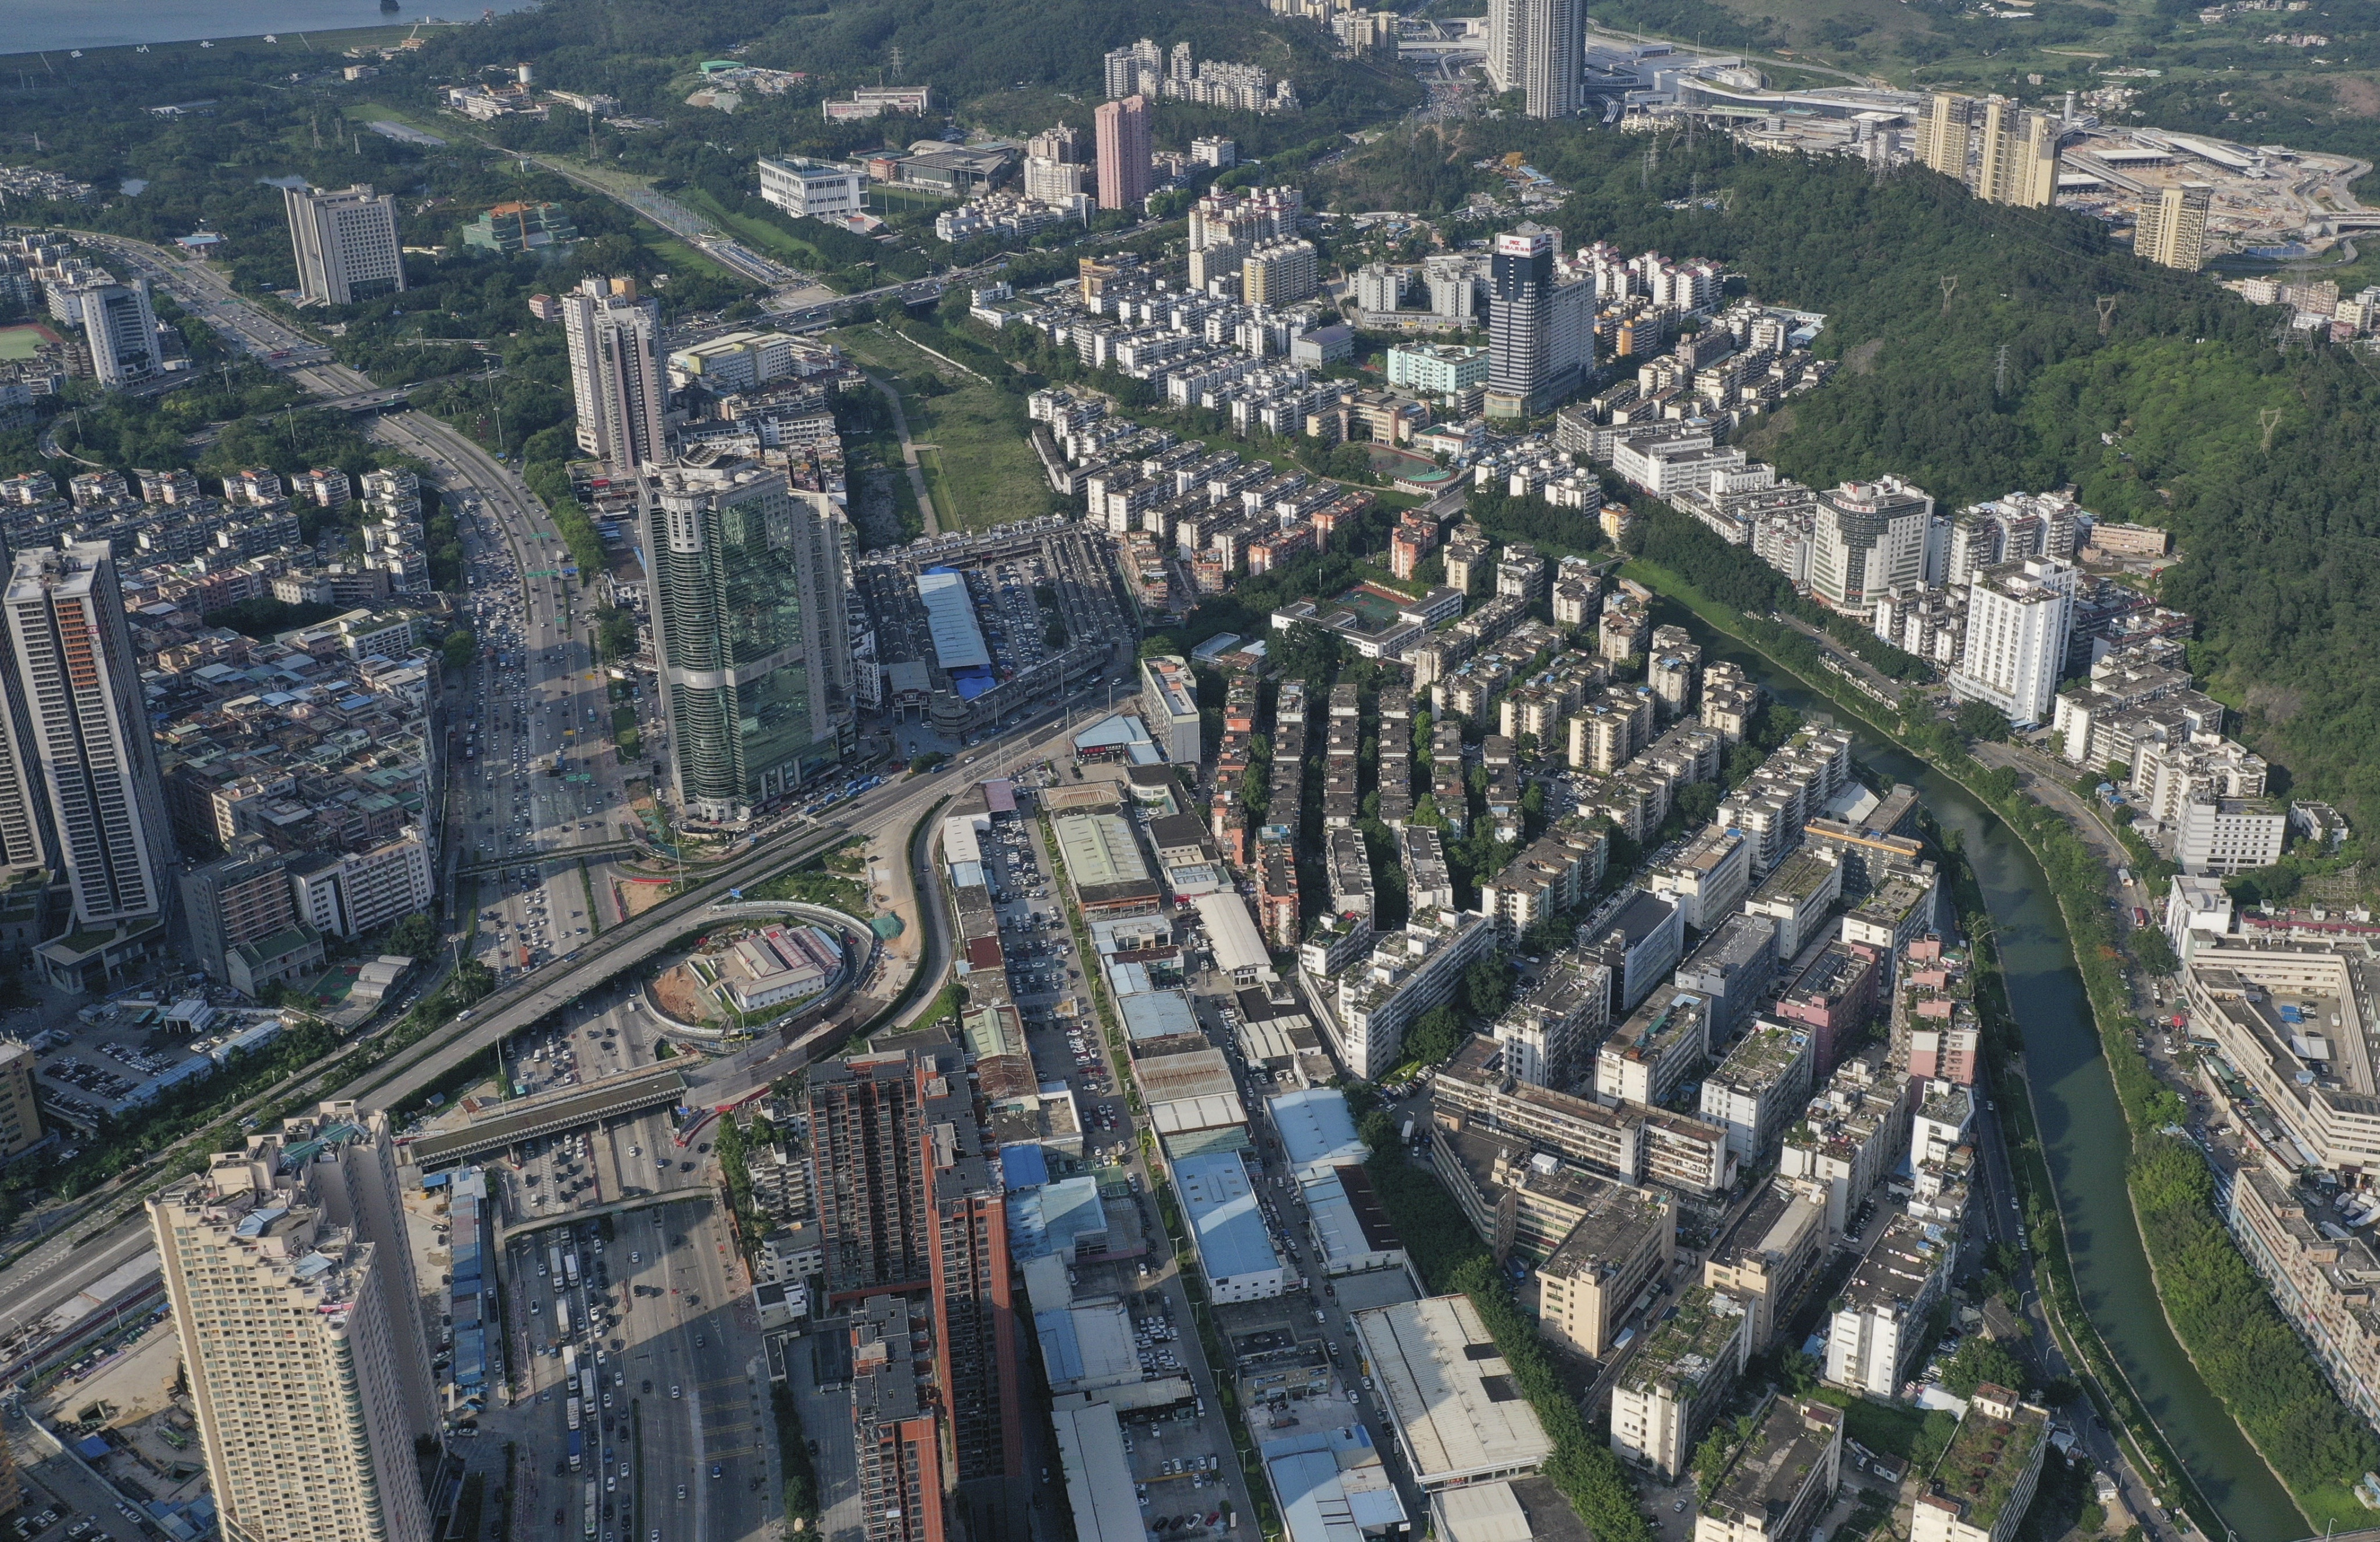 An aerial view of Shenzhen, where the local government has relaxed property rules. Photo: Martin Chan